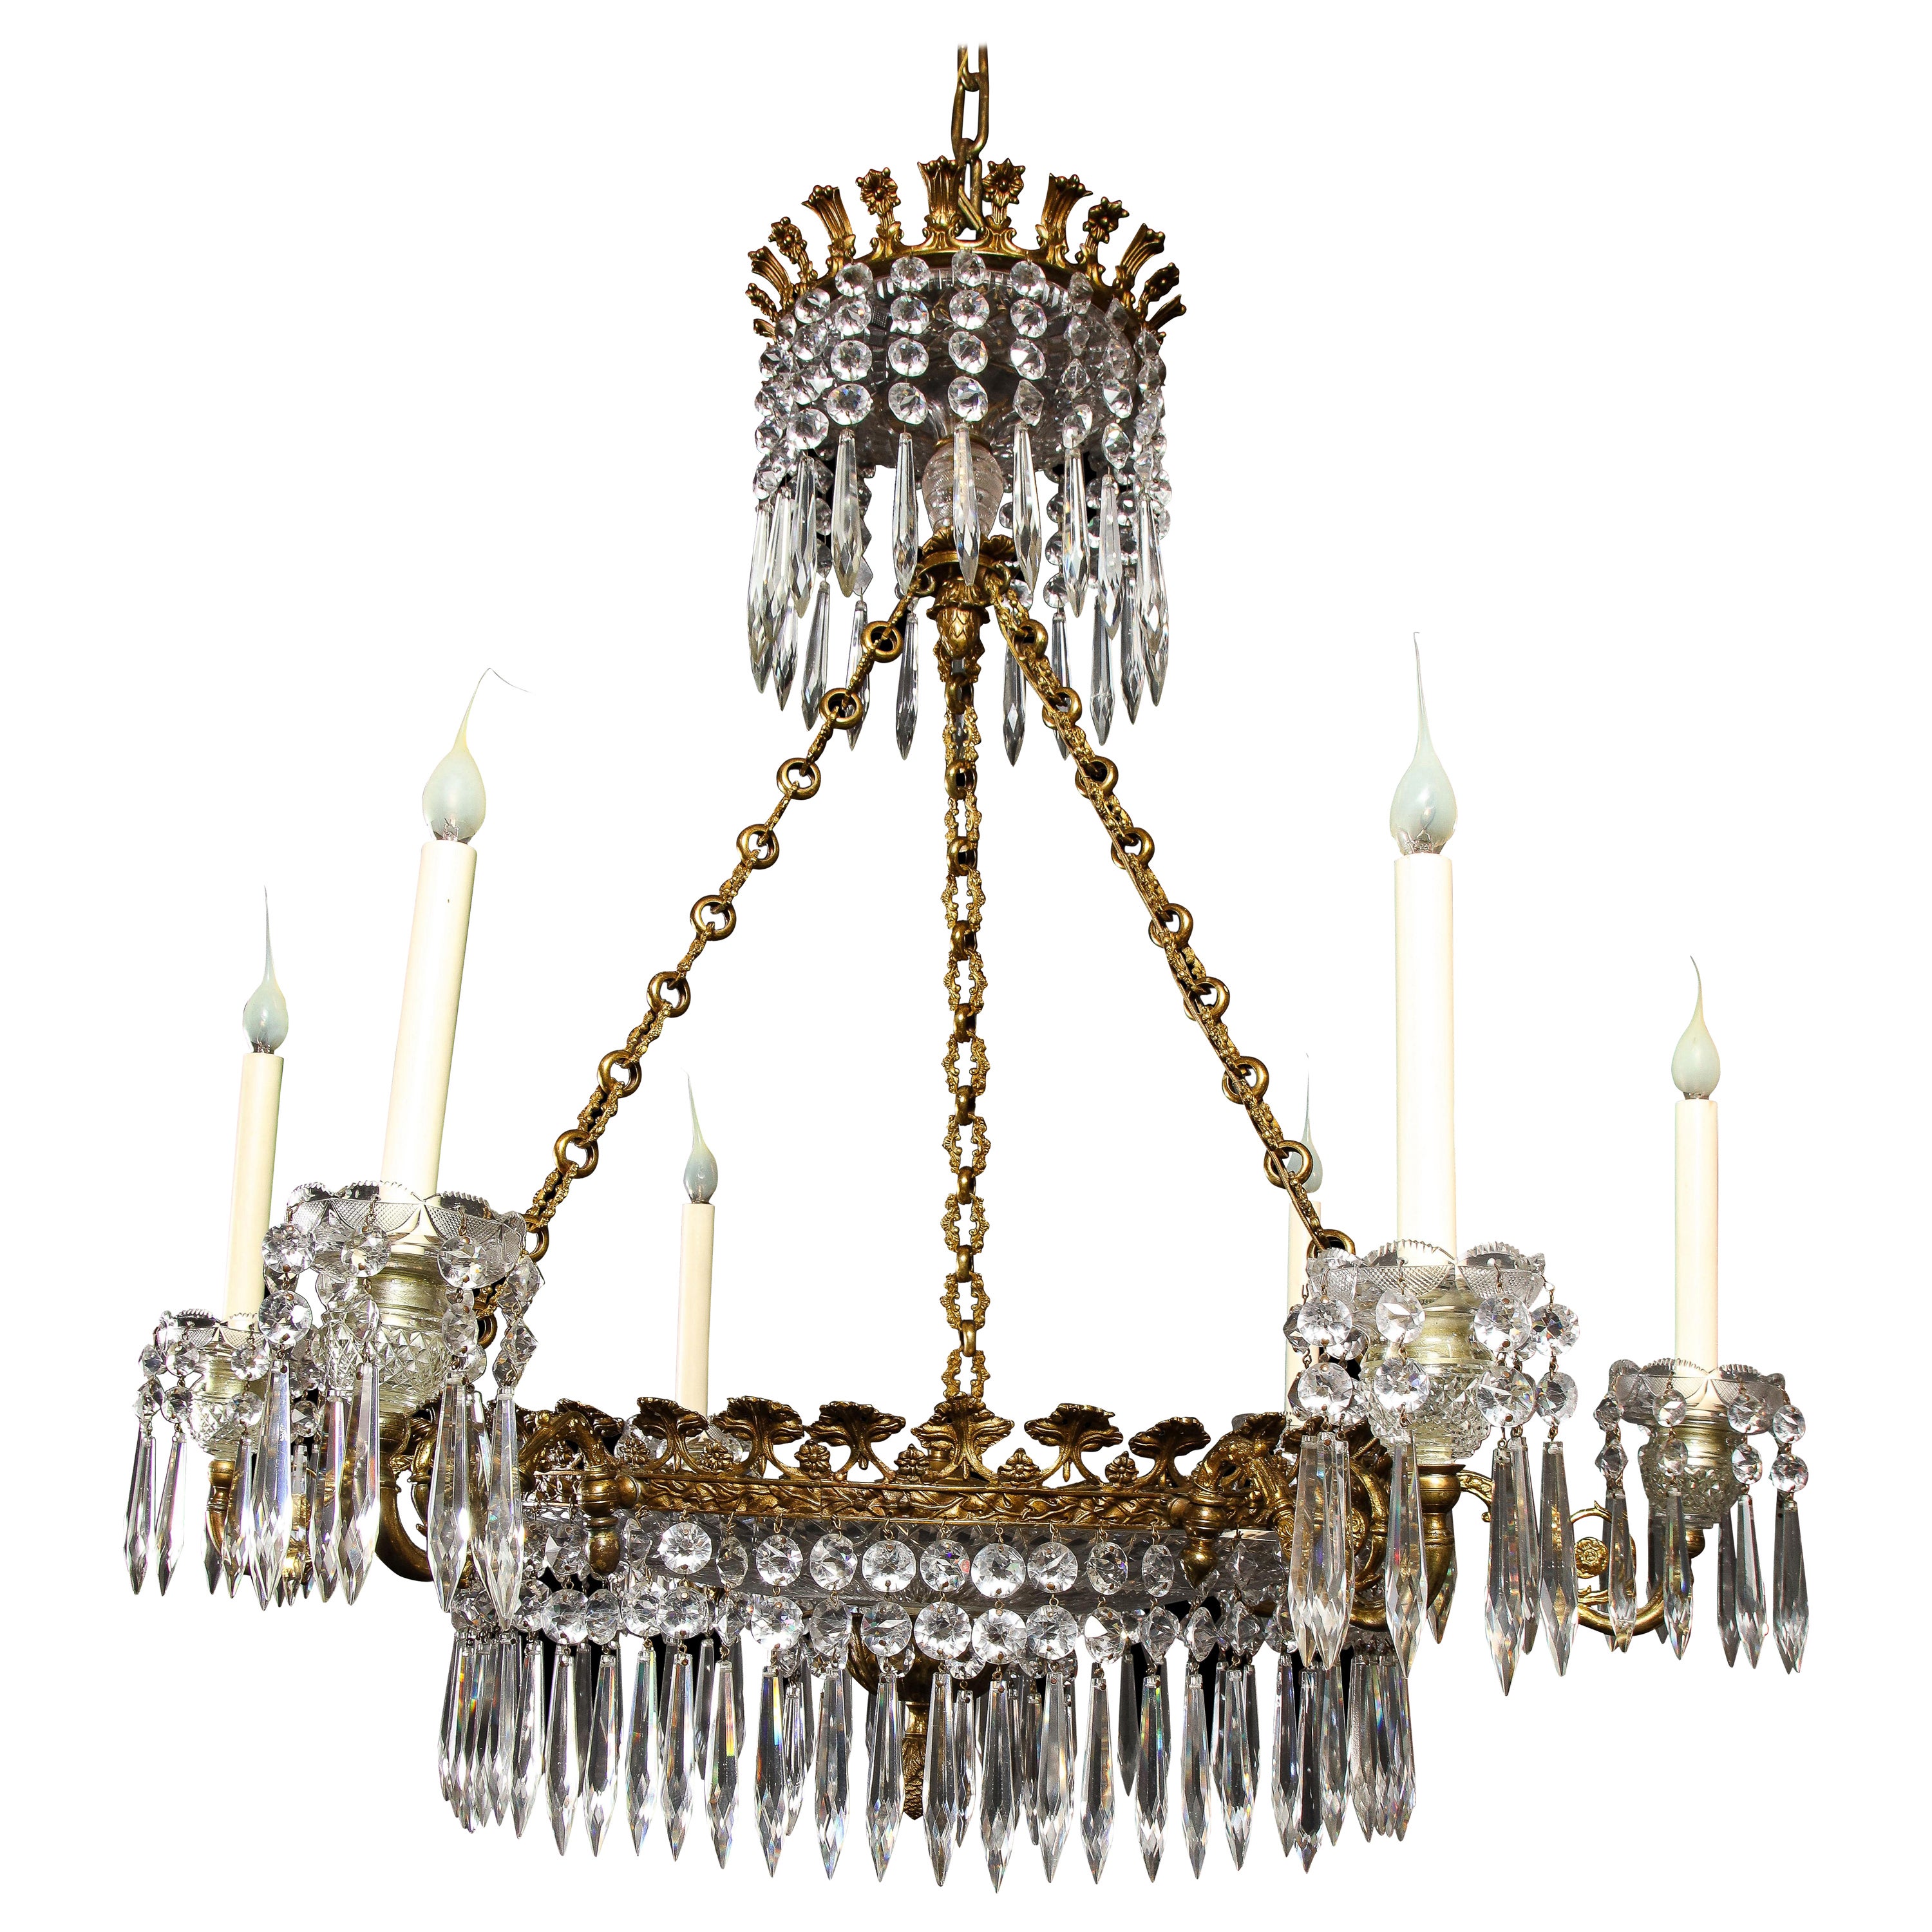 Large Antique English Regency Style Gilt Bronze and Crystal Chandelier 